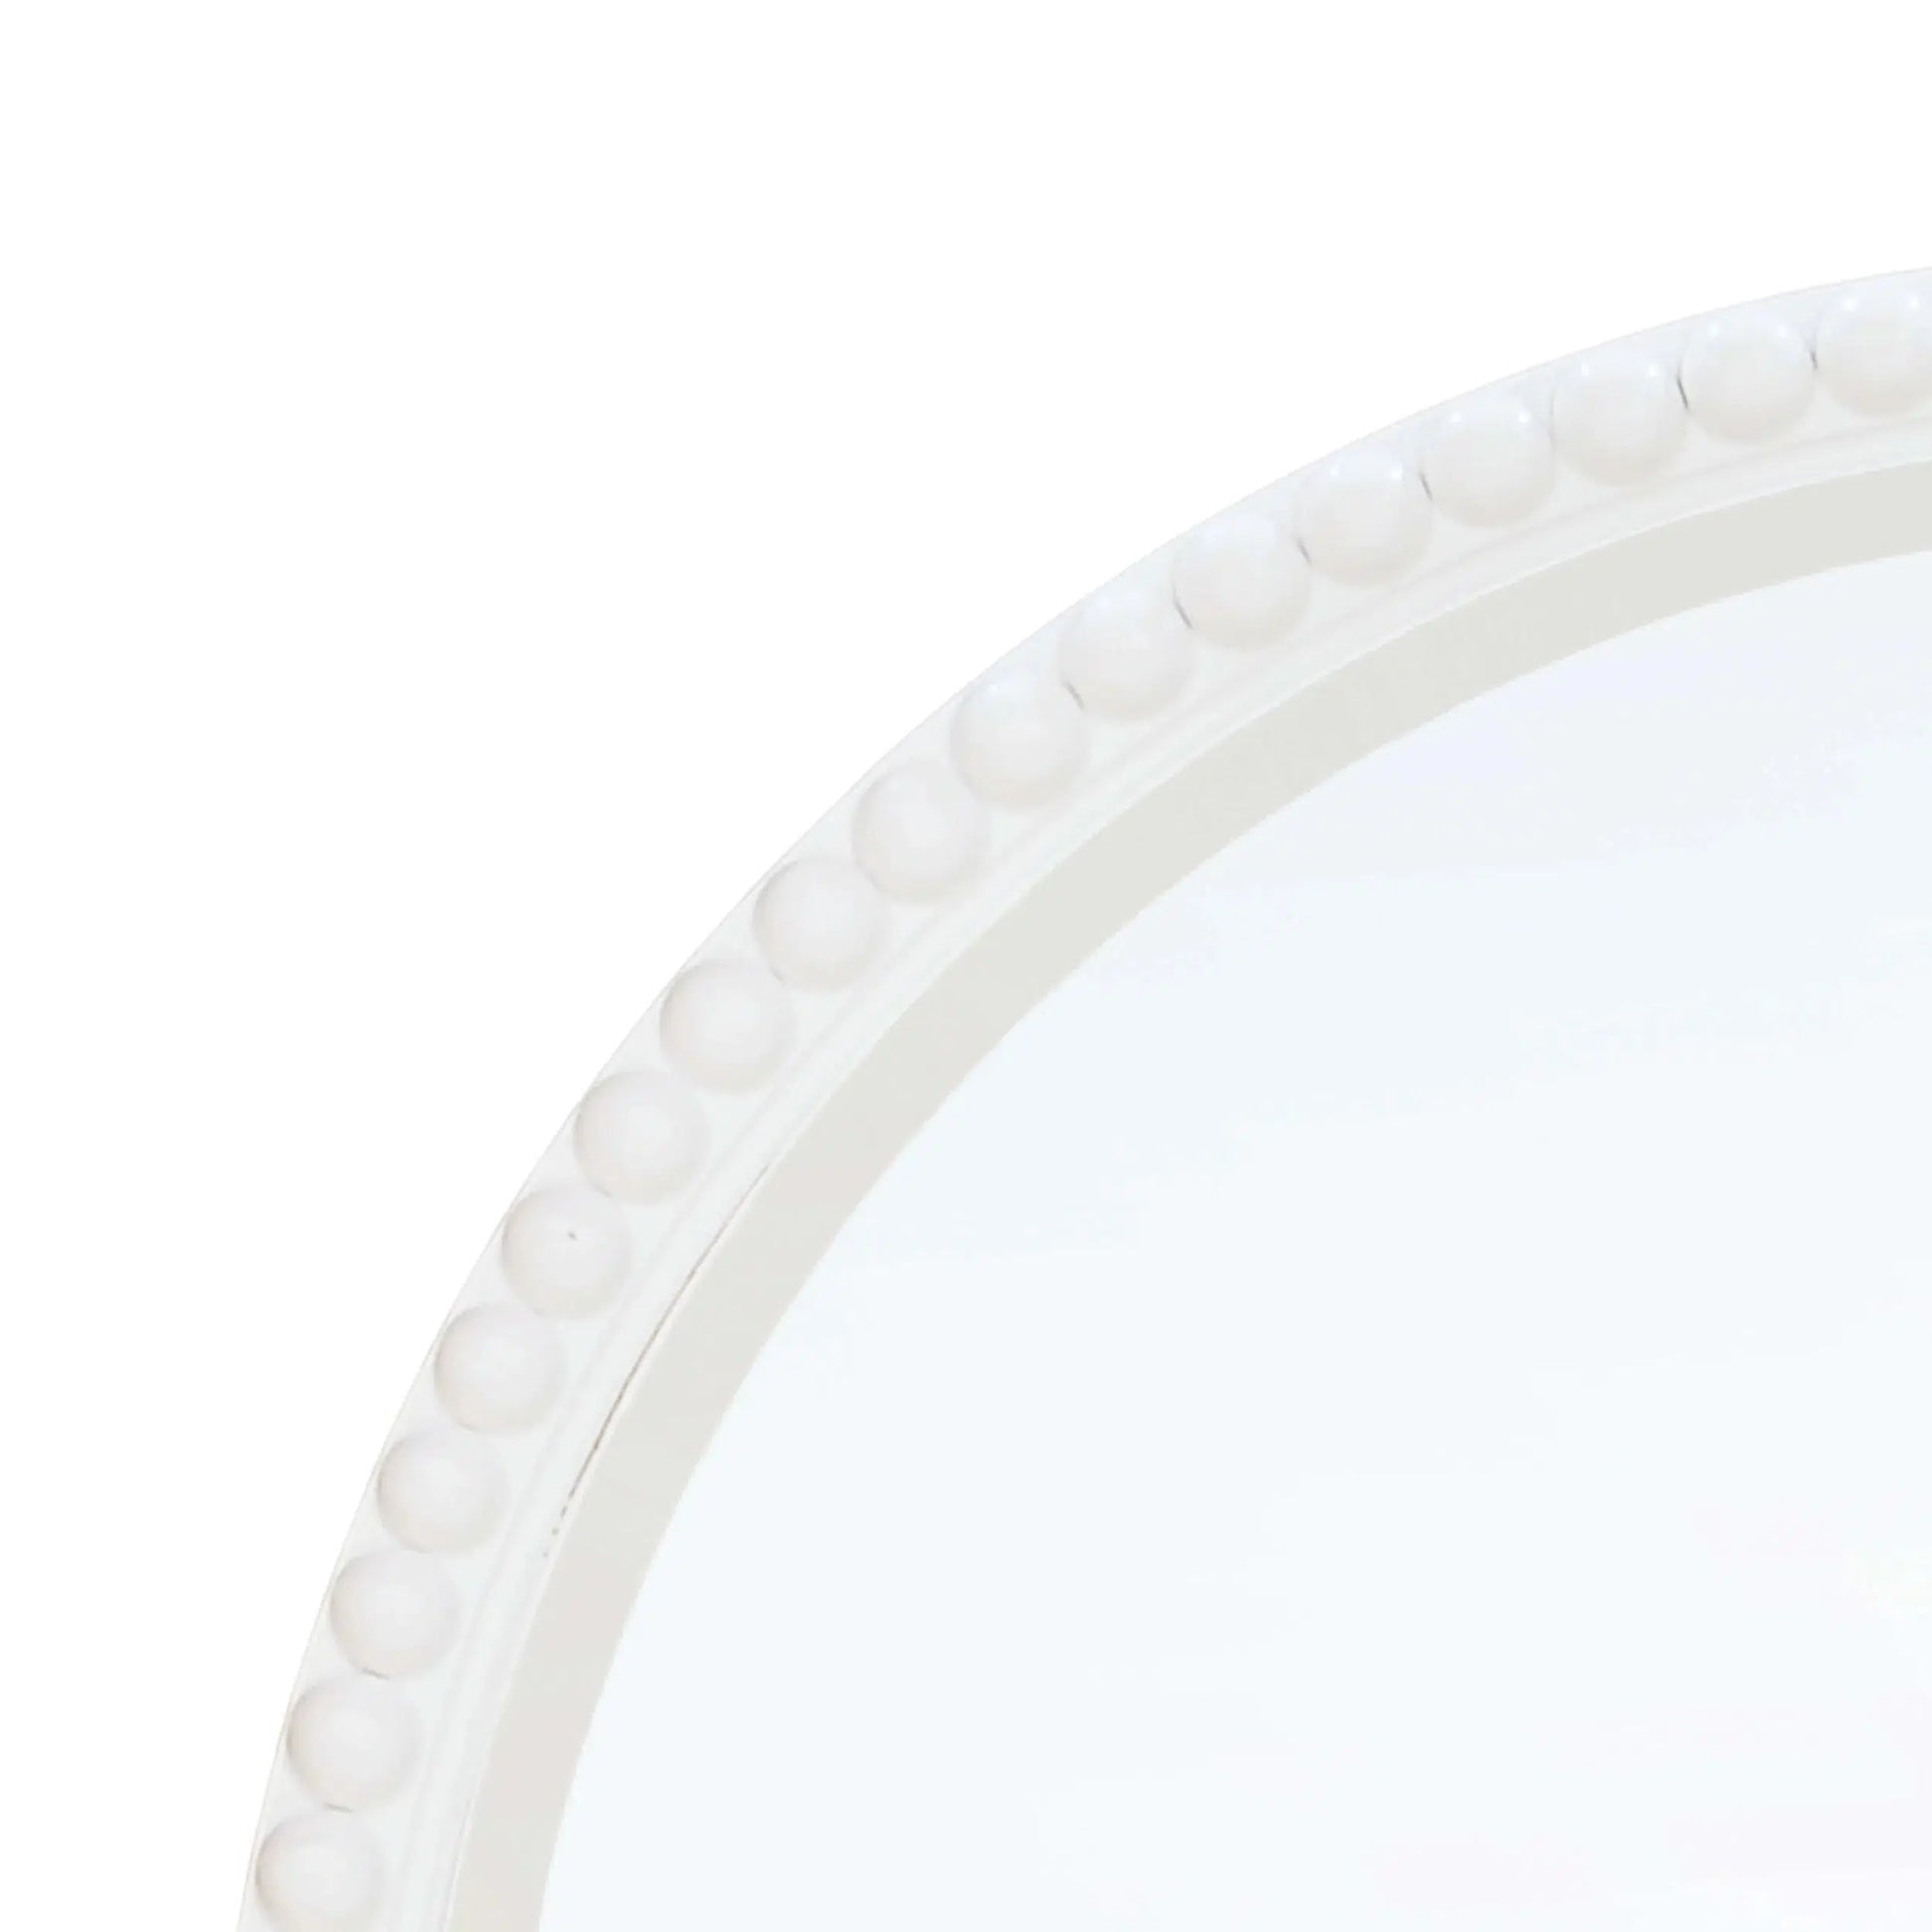 Cholet Round Mirror Large In Architectural White-Blue Hand Home